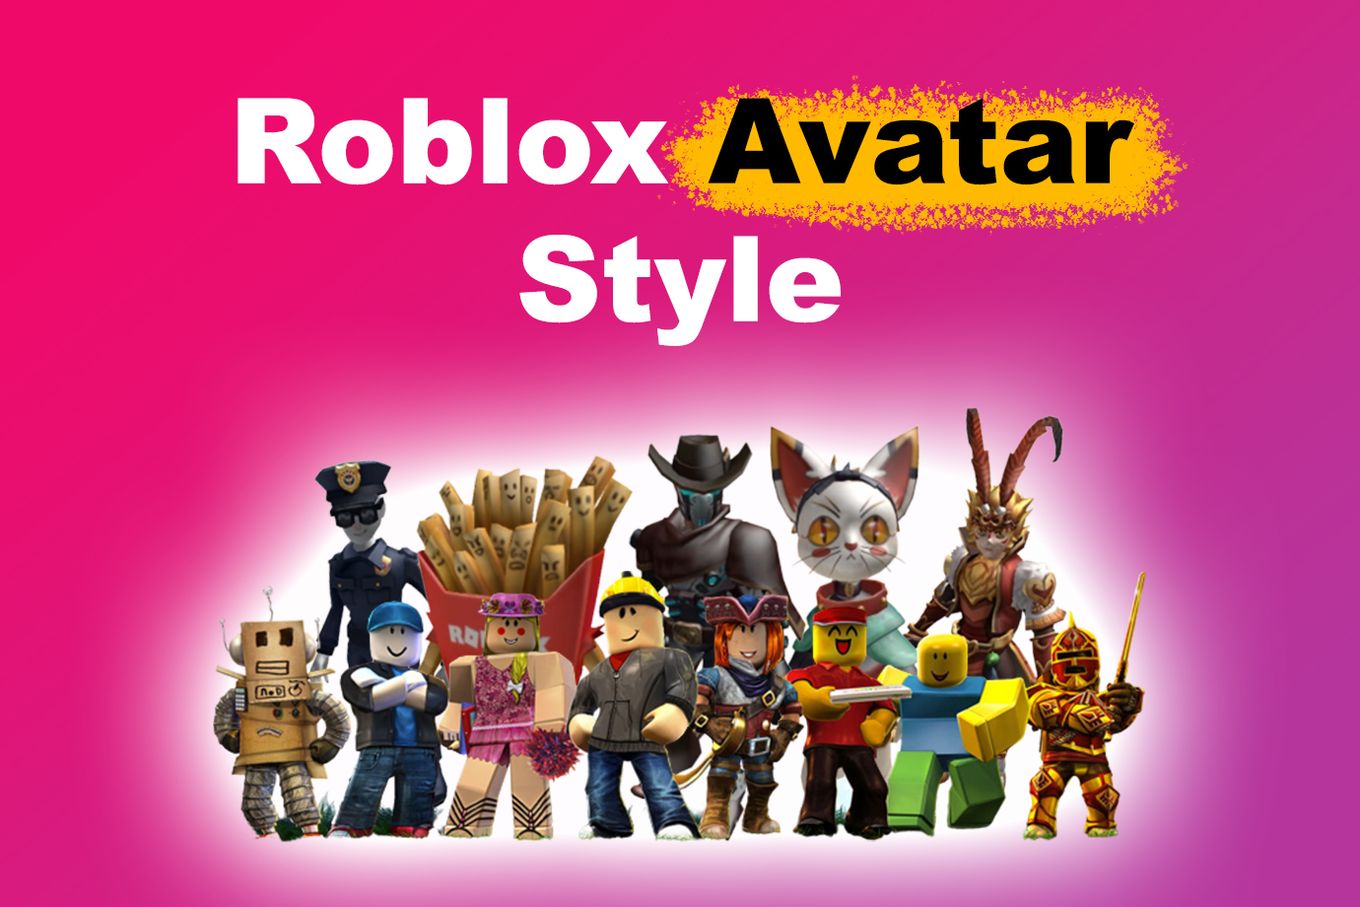 I was inspired by uyellowteas post to make this so heres the evolution  of roblox avatars  rroblox